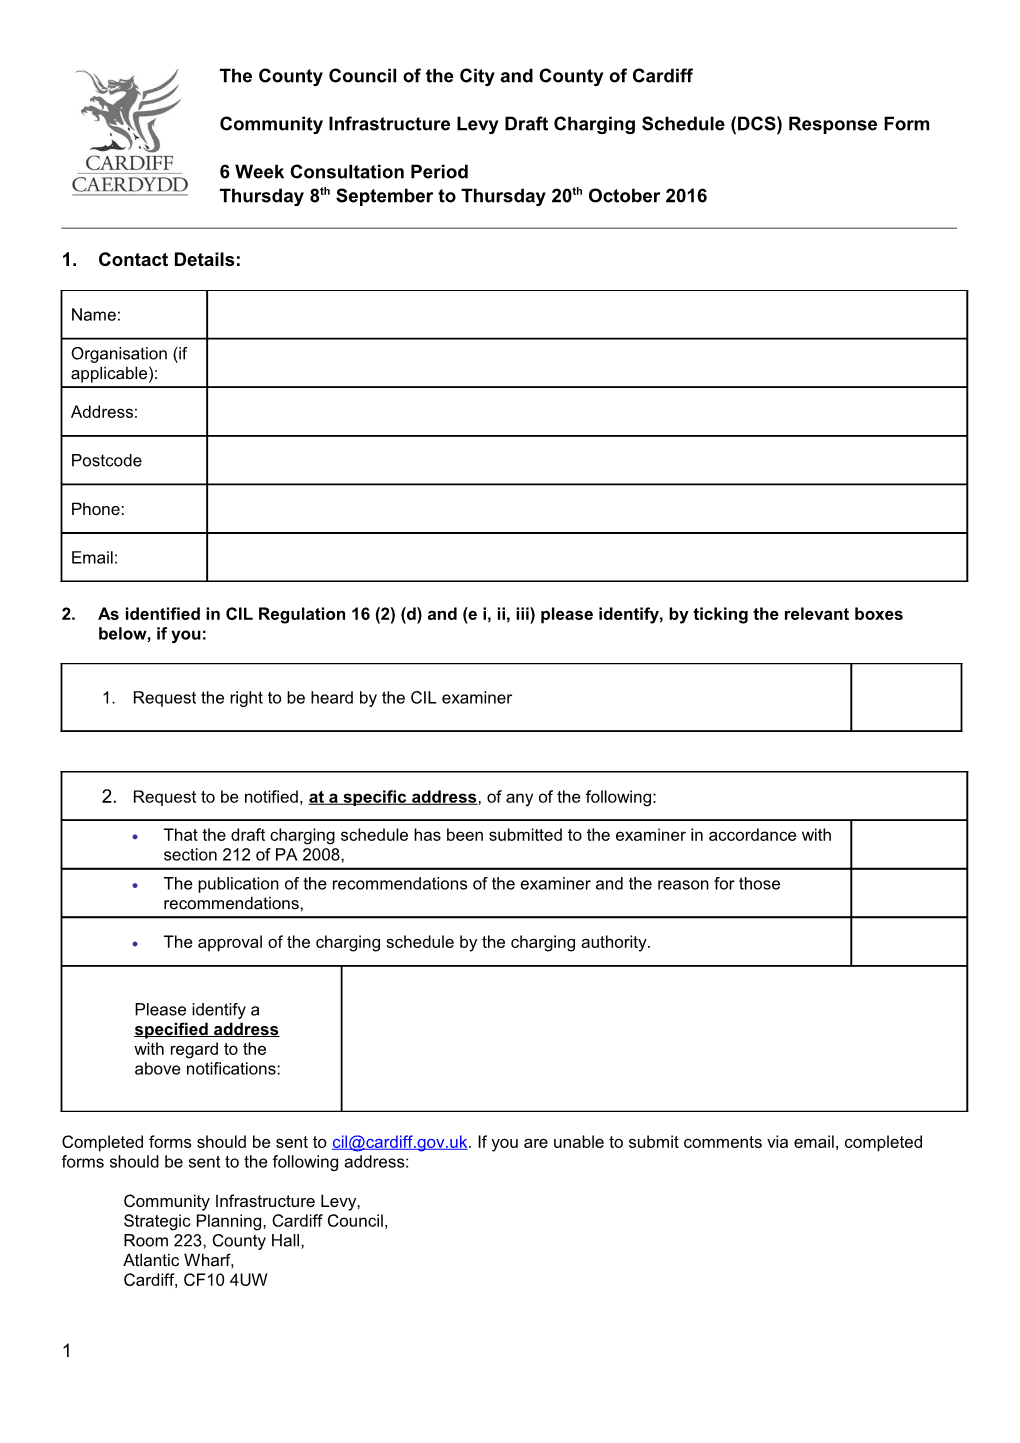 Community Infrastructure Levydraft Charging Schedule (DCS) Response Form